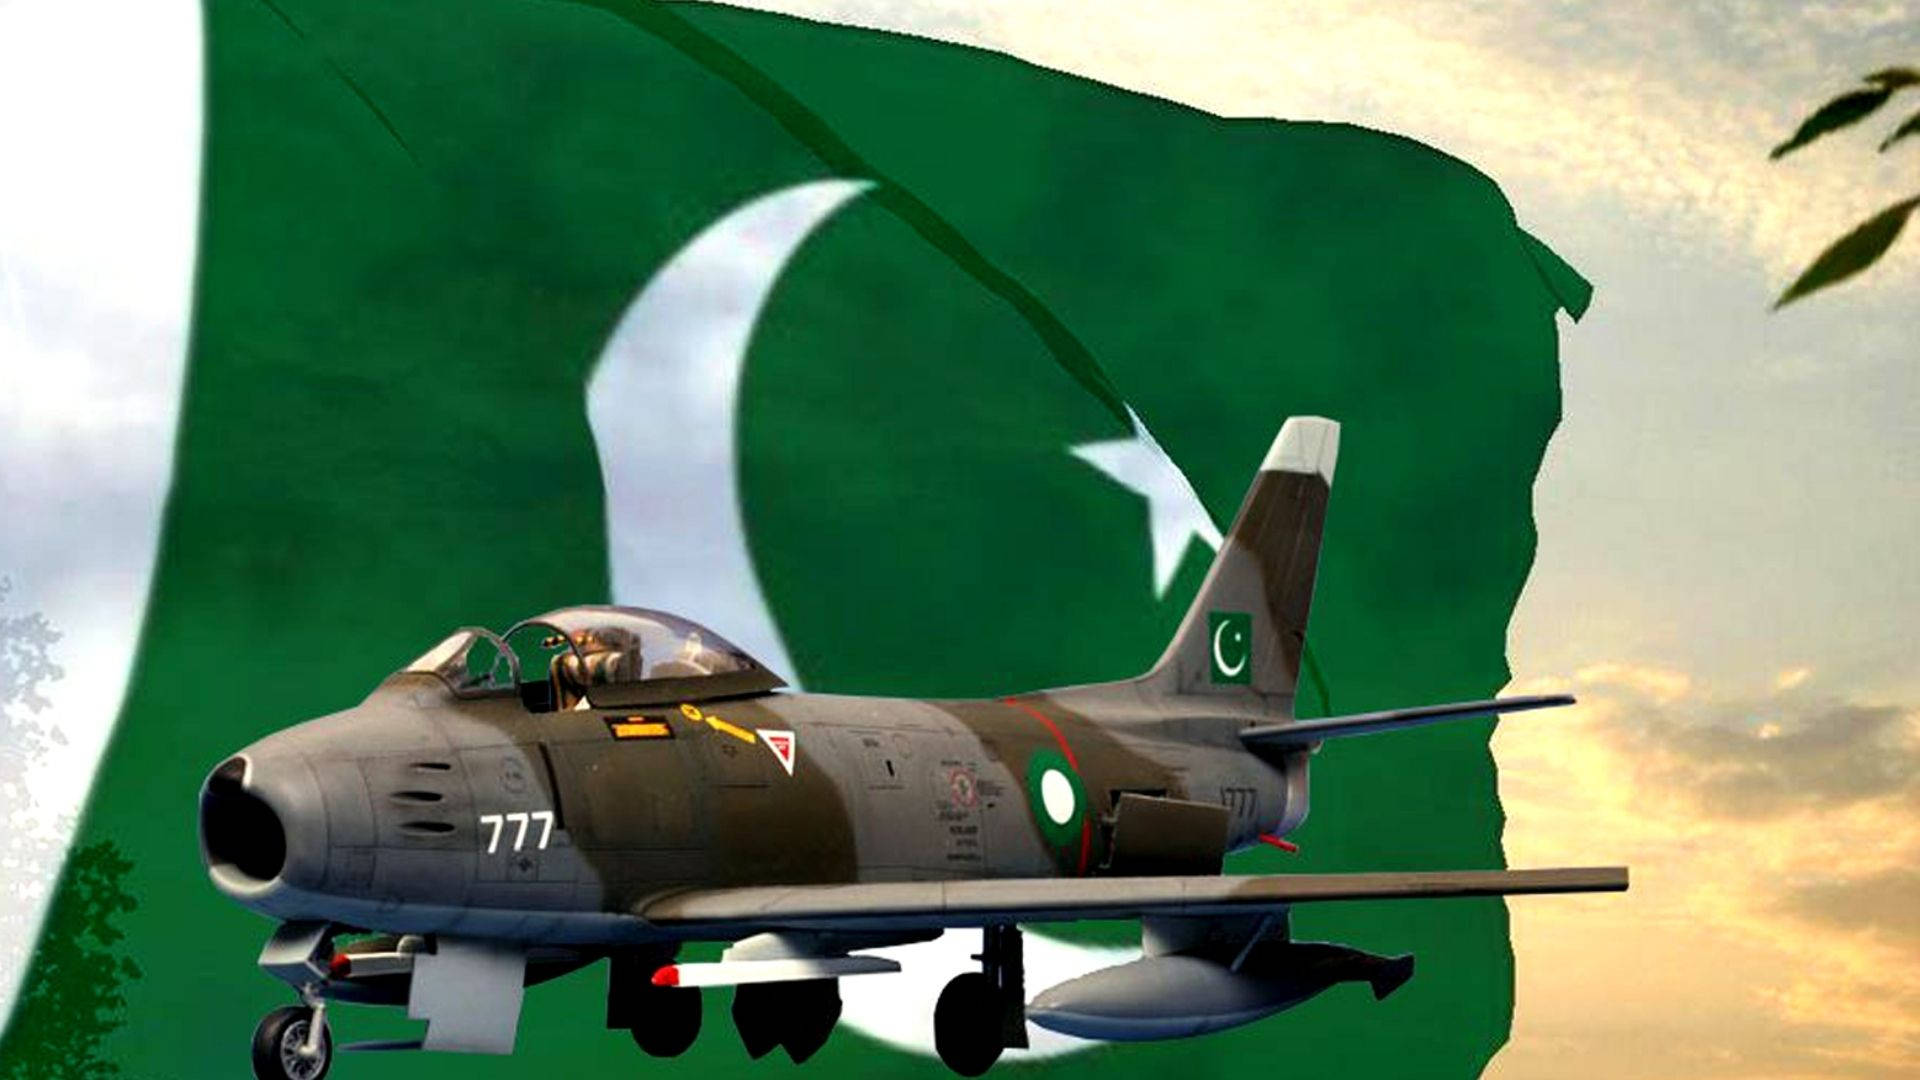 Pakistan Flying Aircraft Background